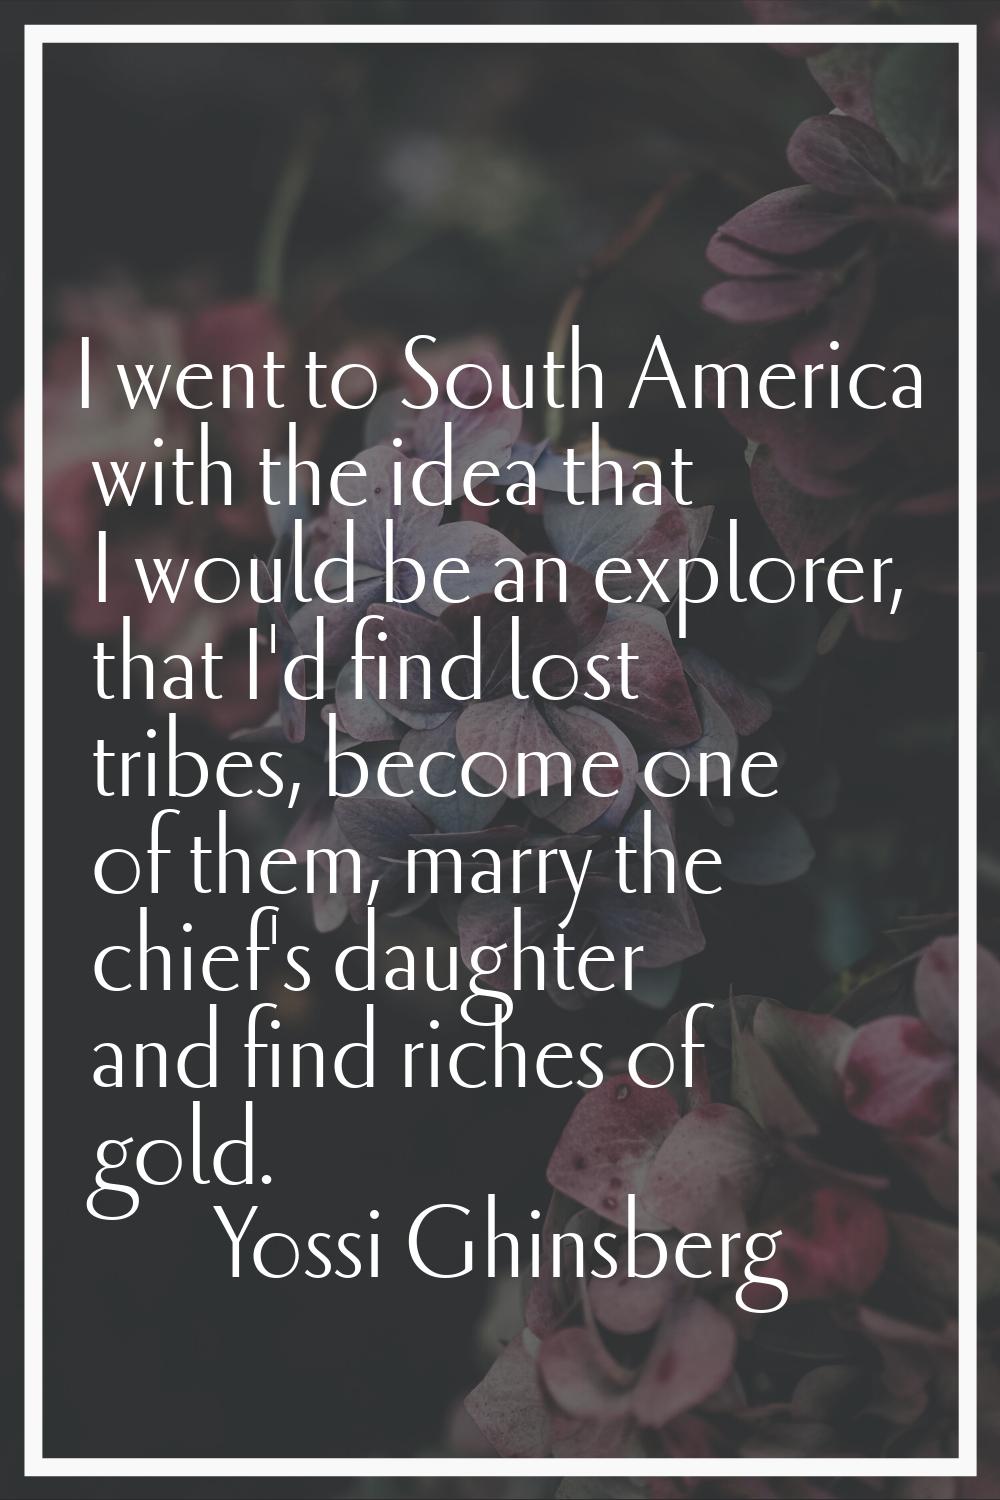 I went to South America with the idea that I would be an explorer, that I'd find lost tribes, becom